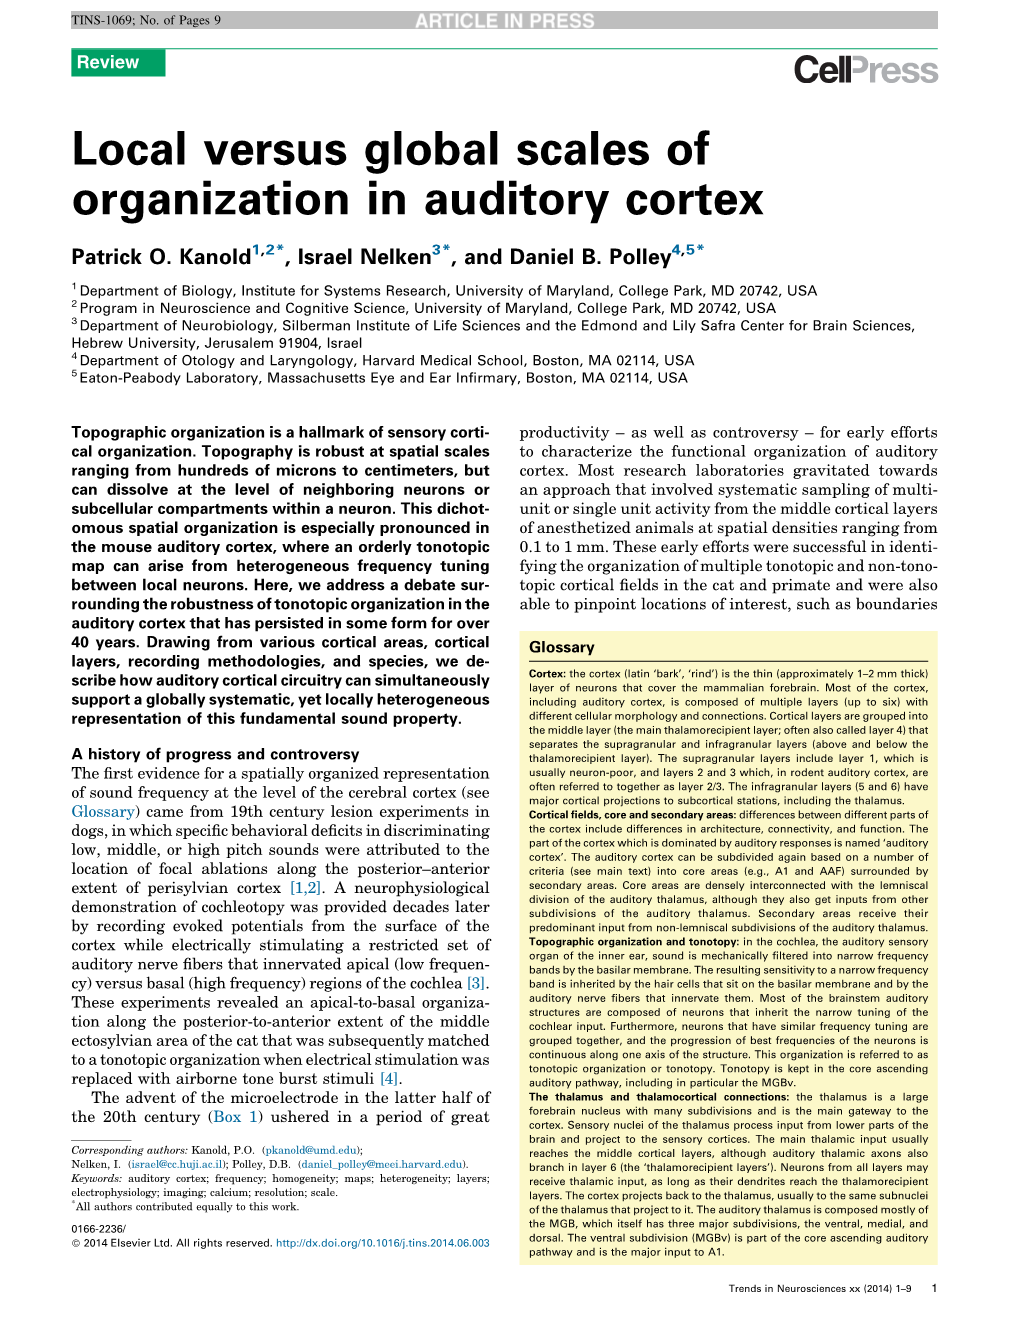 Local Versus Global Scales of Organization in Auditory Cortex